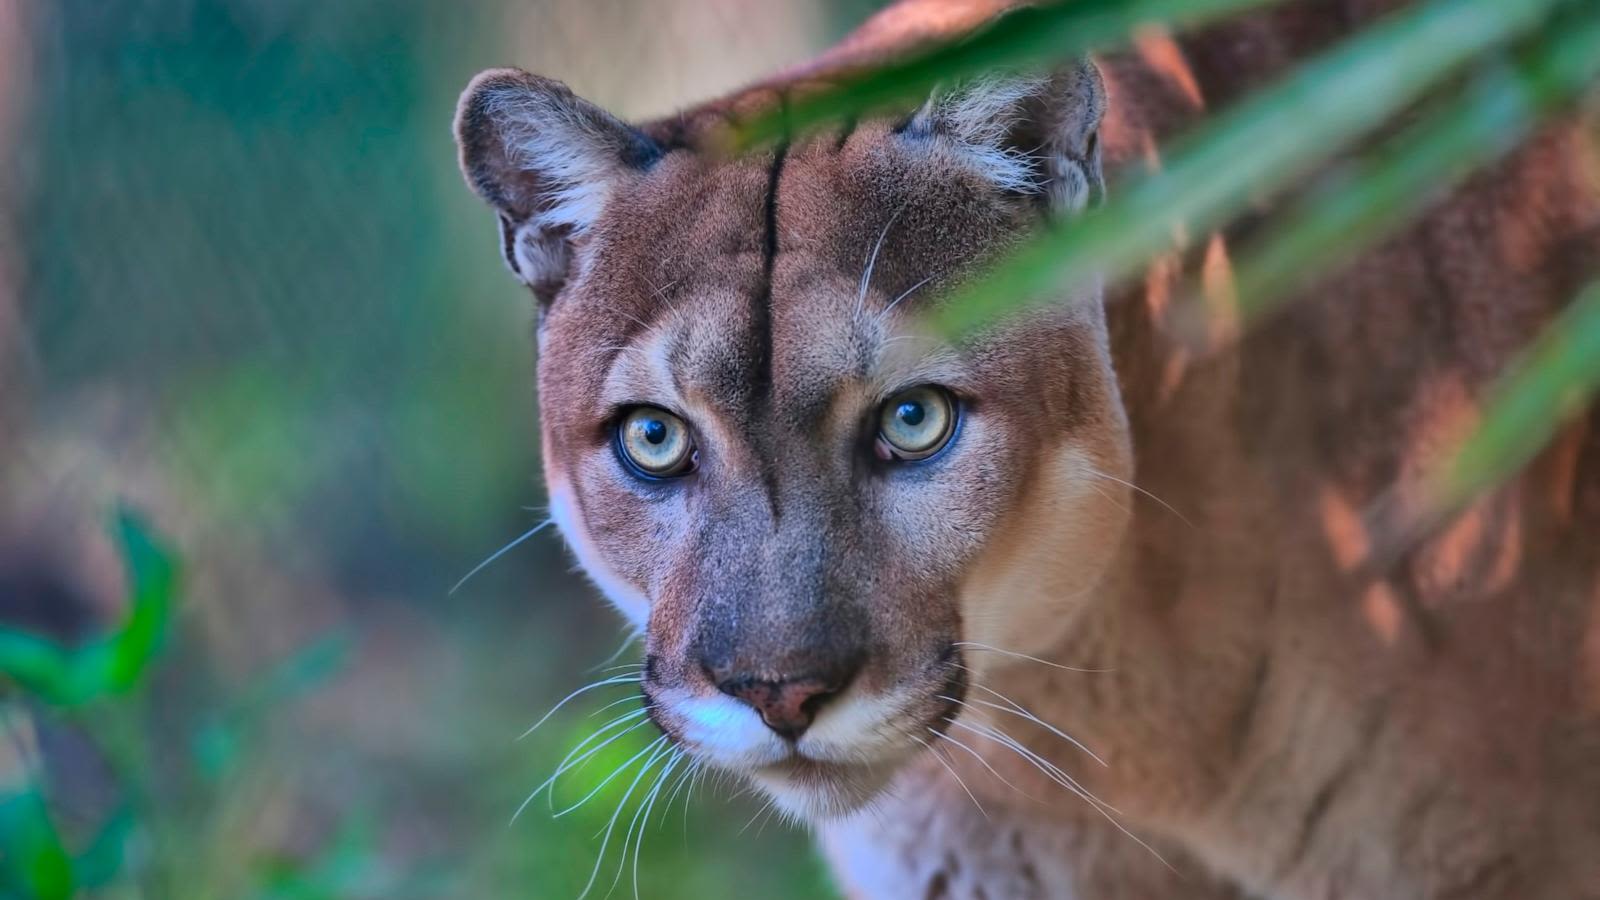 Only about 200 Florida panthers are left. Here's how experts are trying to save them.